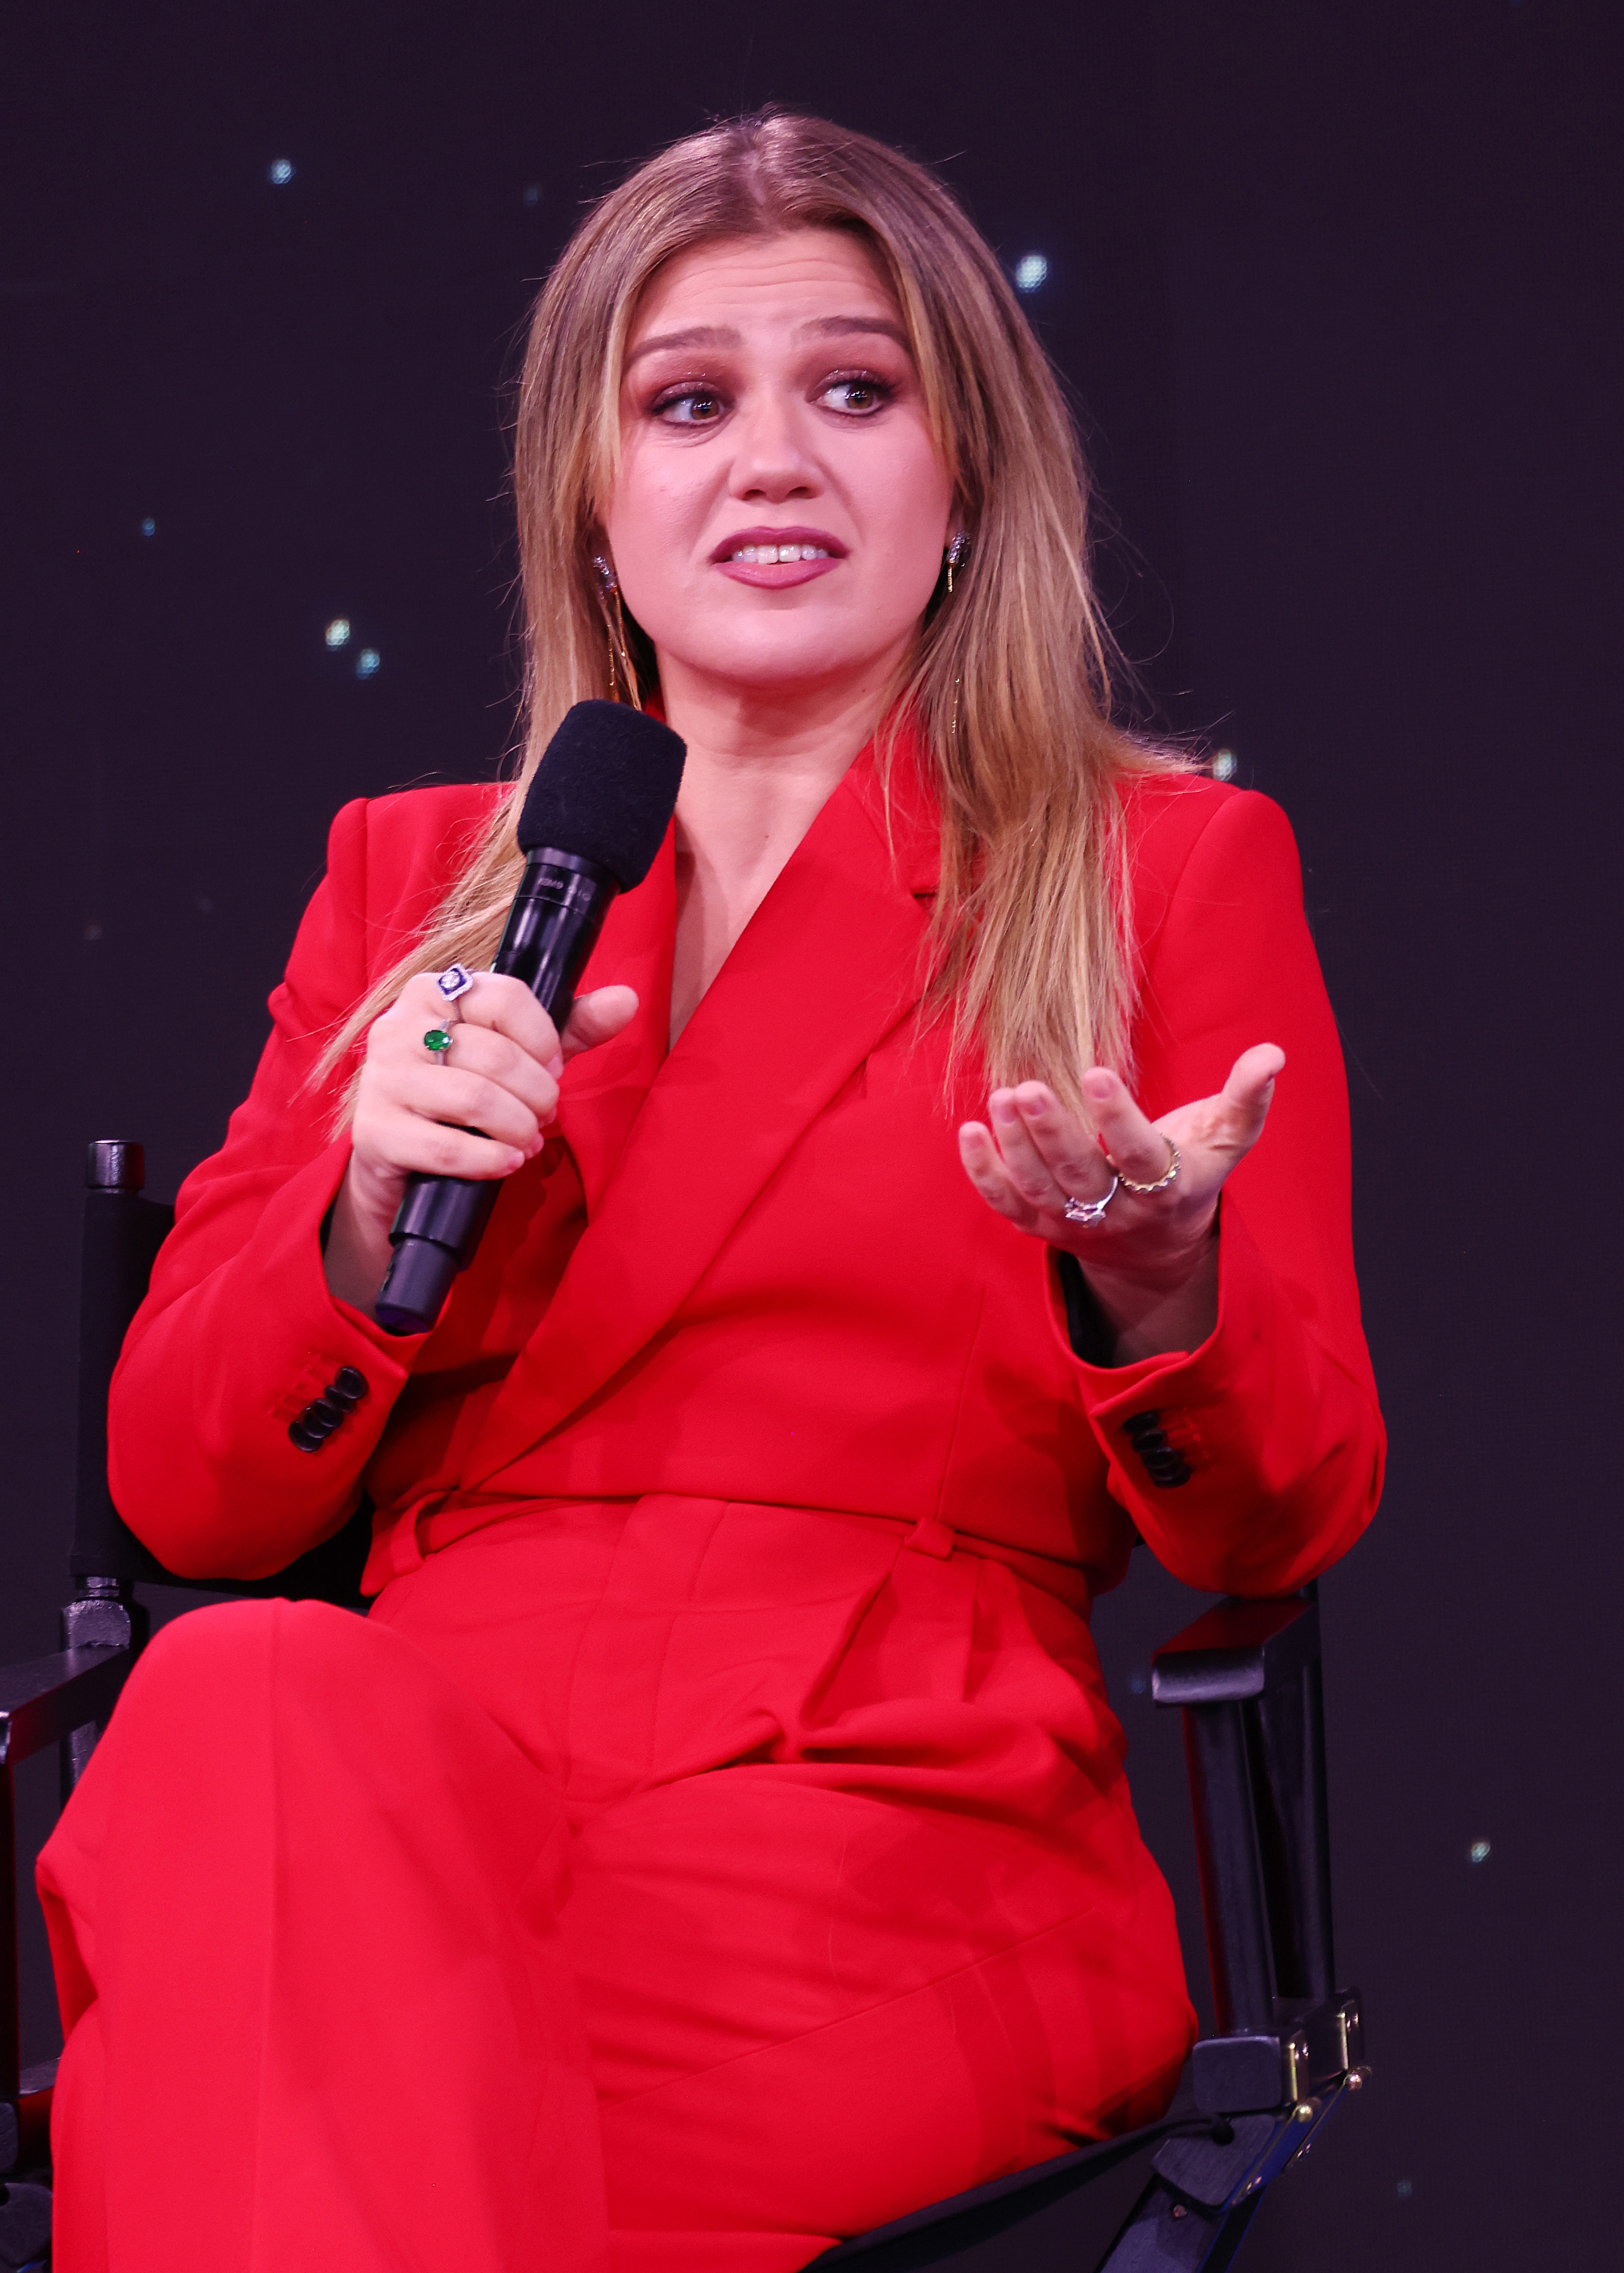 Kelly in a suit sitting and speaking into a microphone